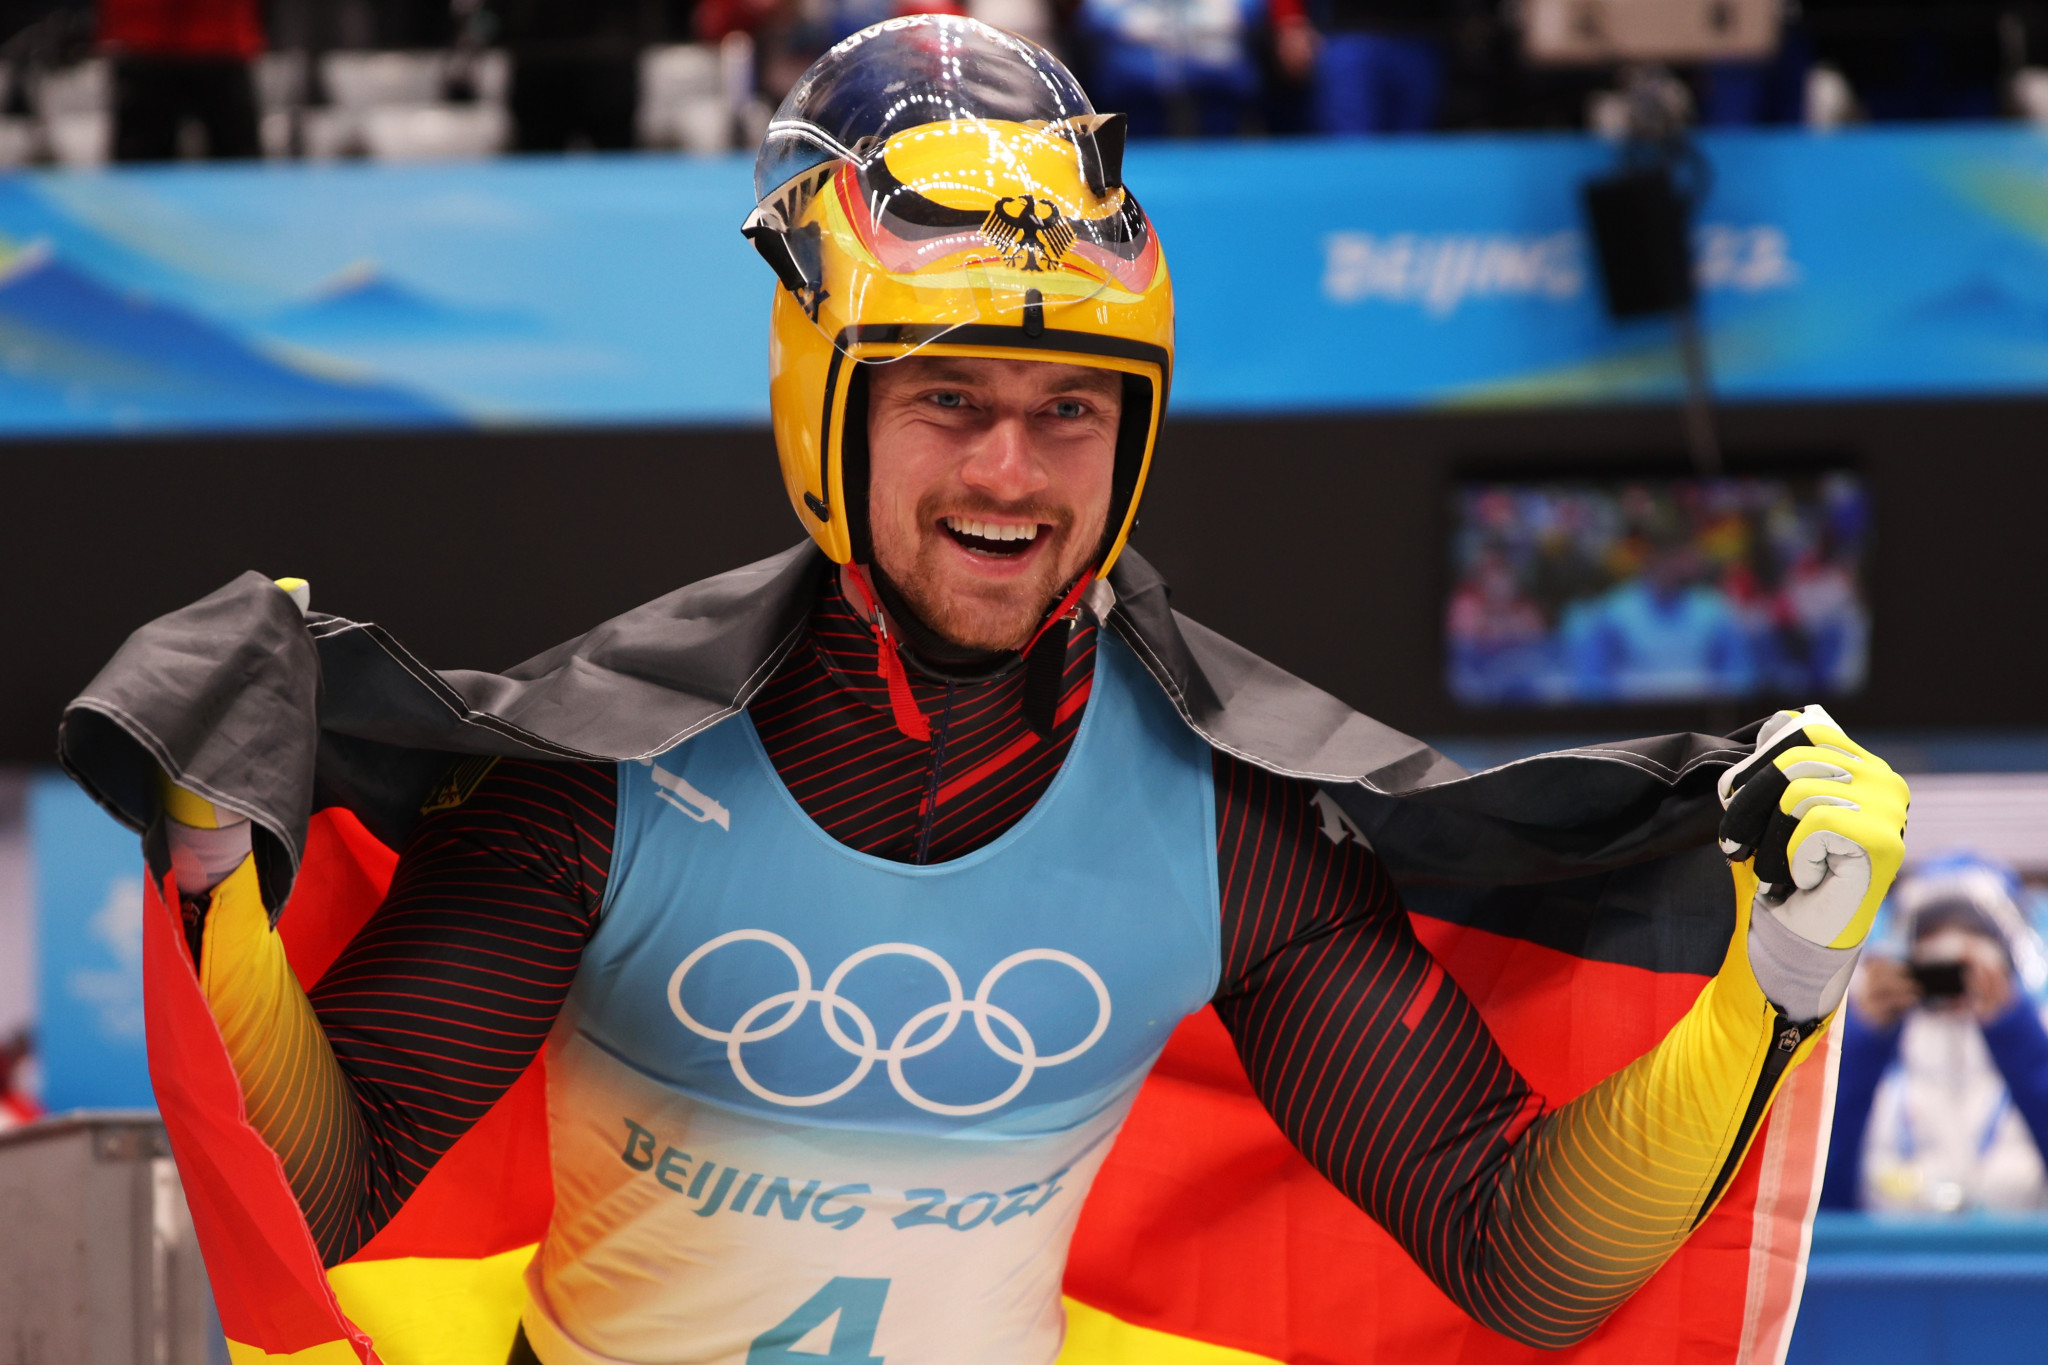 Johannes Ludwig failed to qualify for Vancouver 2010 and Sochi 2014 before claiming bronze at Pyeongchang 2018 and winning gold at Beijing 2022 ©Getty Images